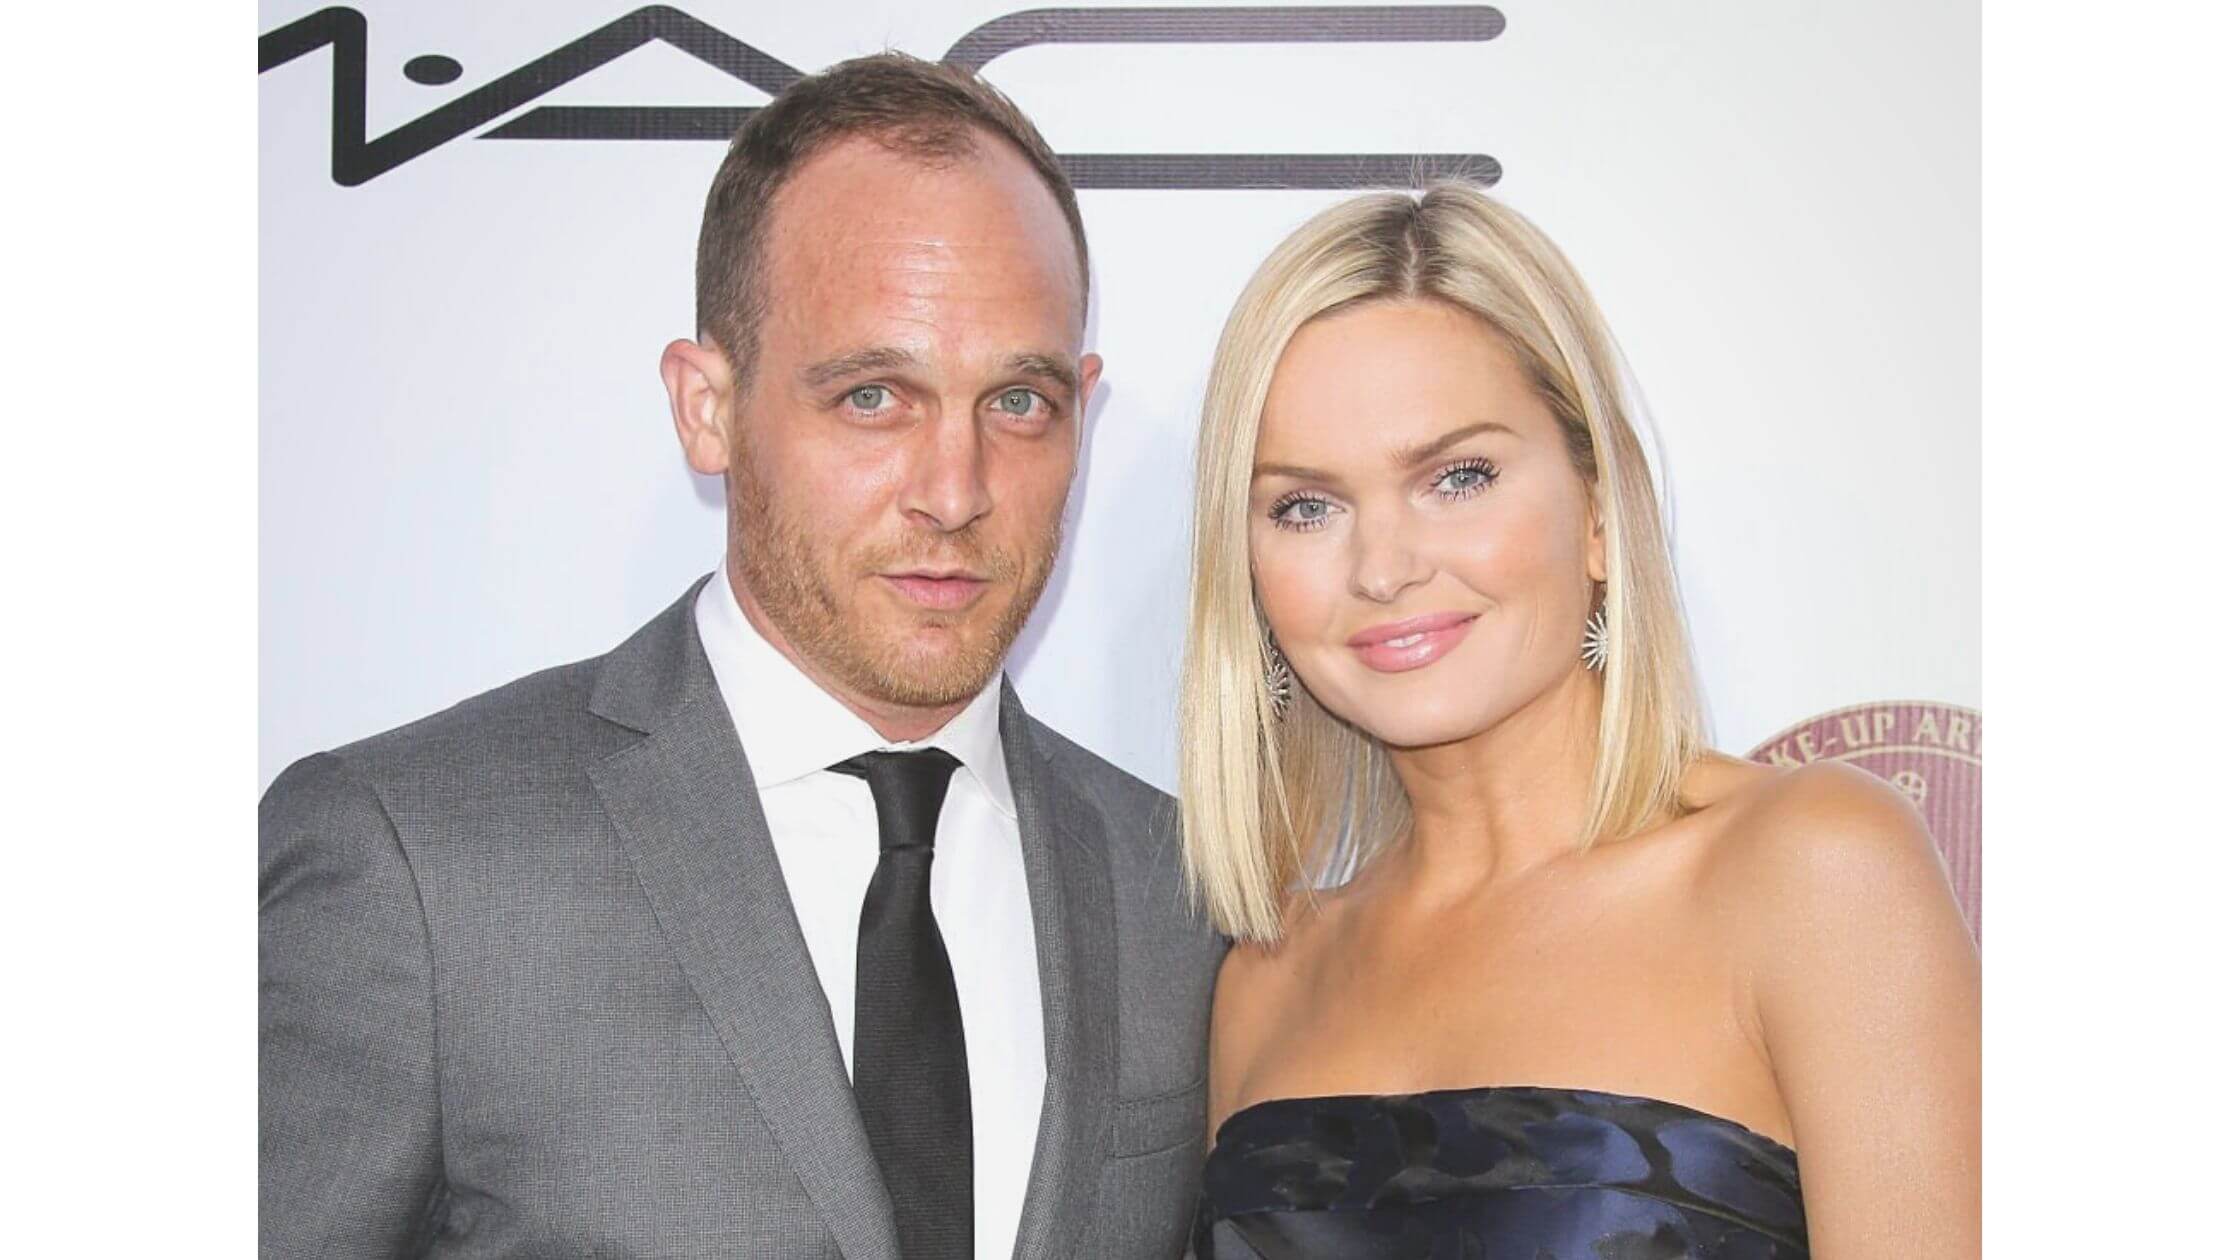 Actor-Ethan-Embry-And-Actress-Sunny-Mabrey-Got-Remarried-Two-Years-After-Their-Divorce-All-You-Need-To-Know-About-Personal-Life-And-Professional-Life